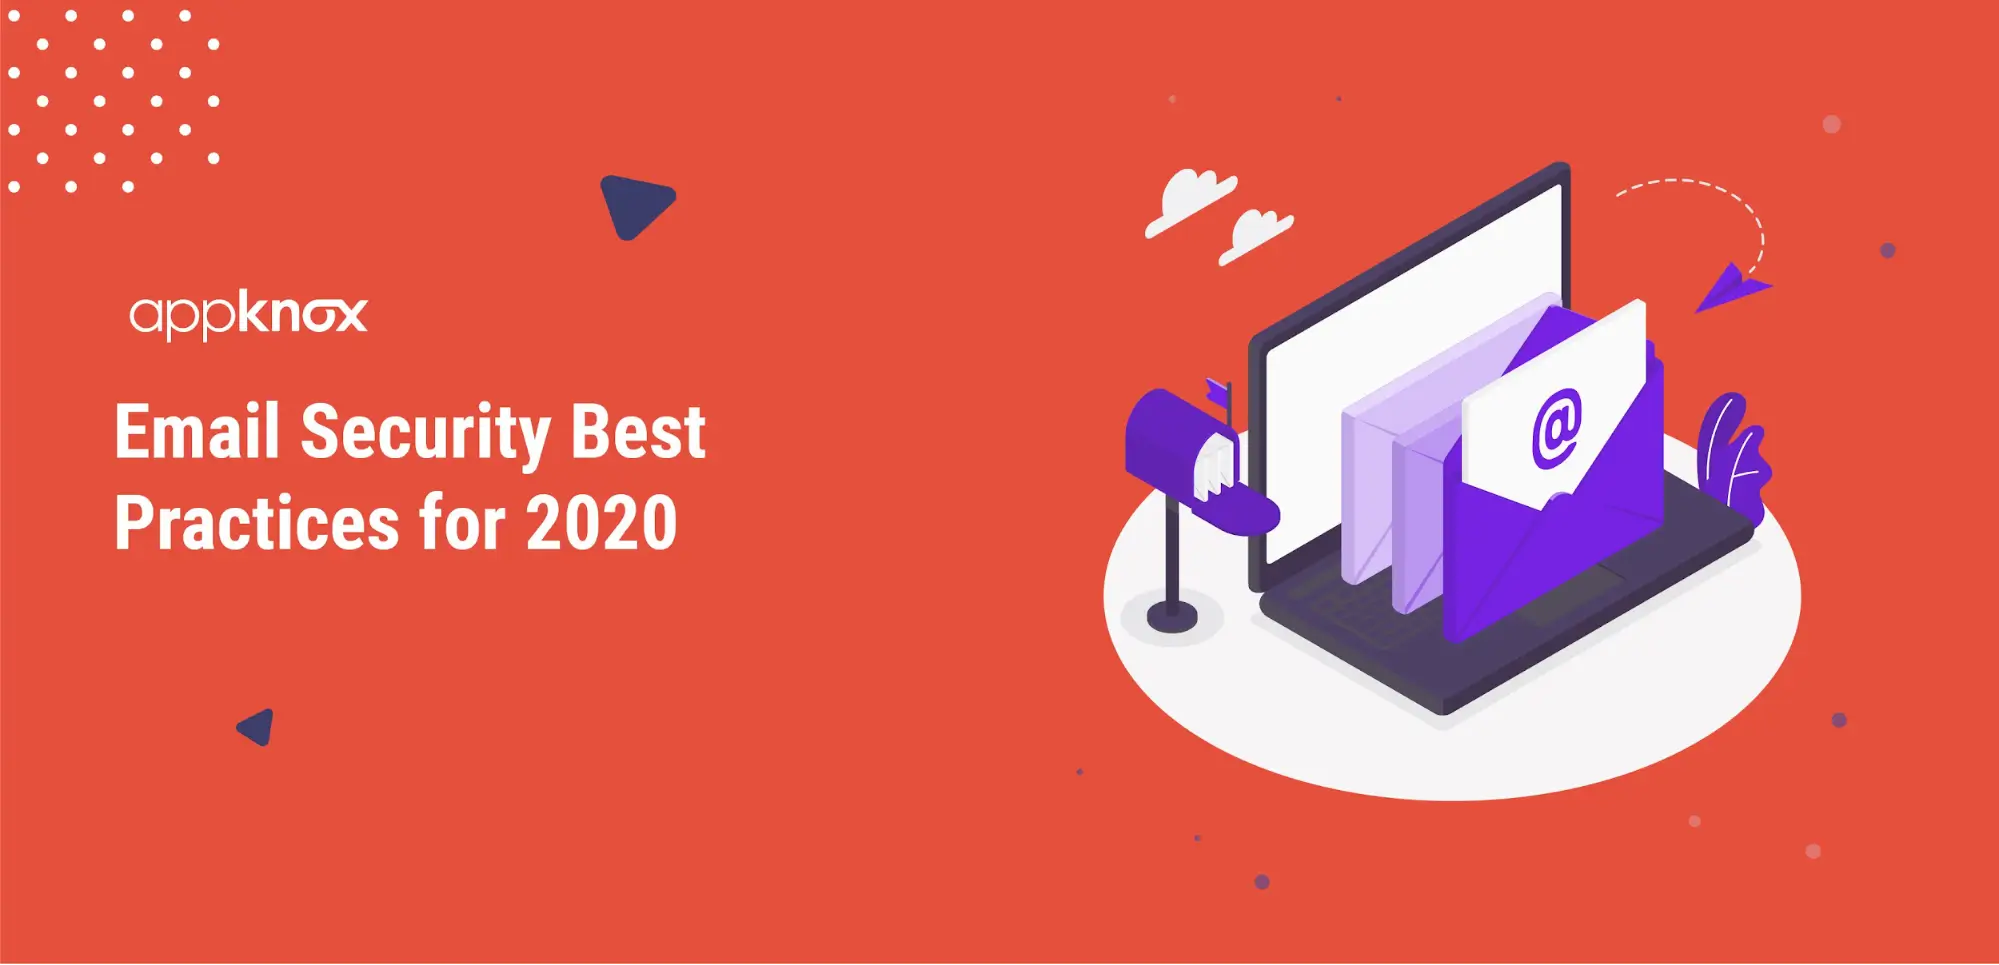 Email security best practices for 2020